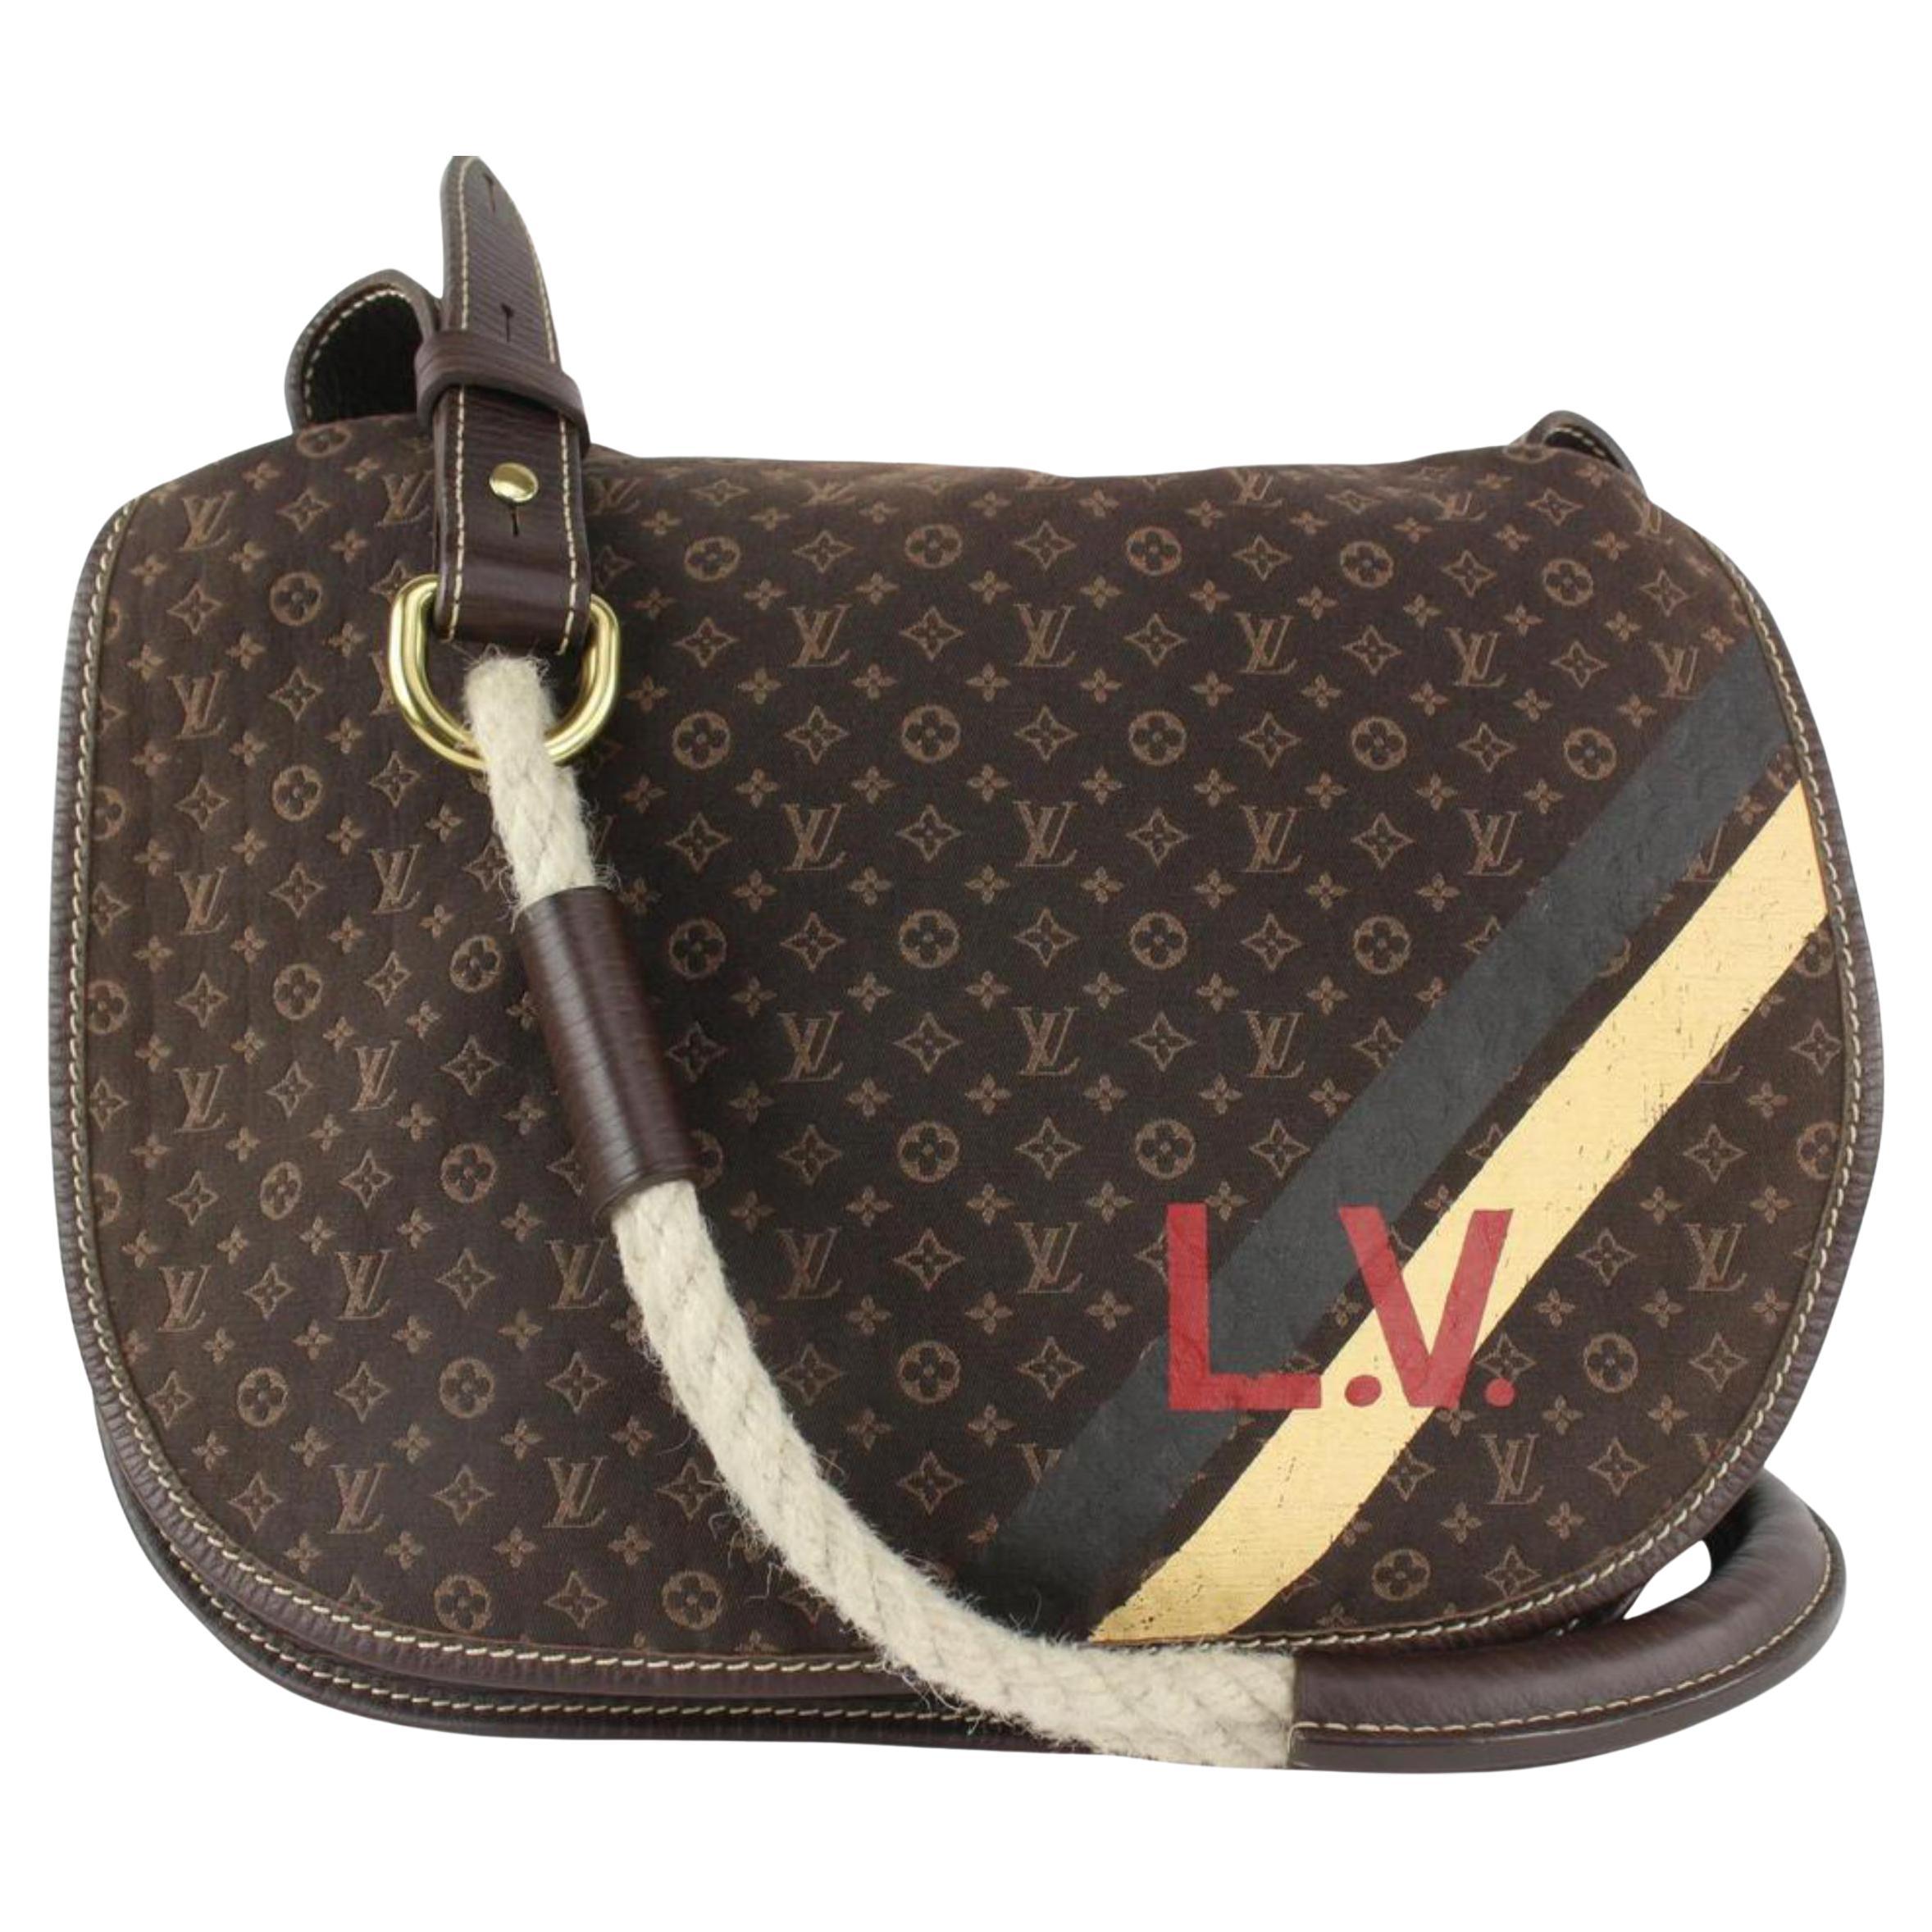 Louis Vuitton Purse Initials - 35 For Sale on 1stDibs